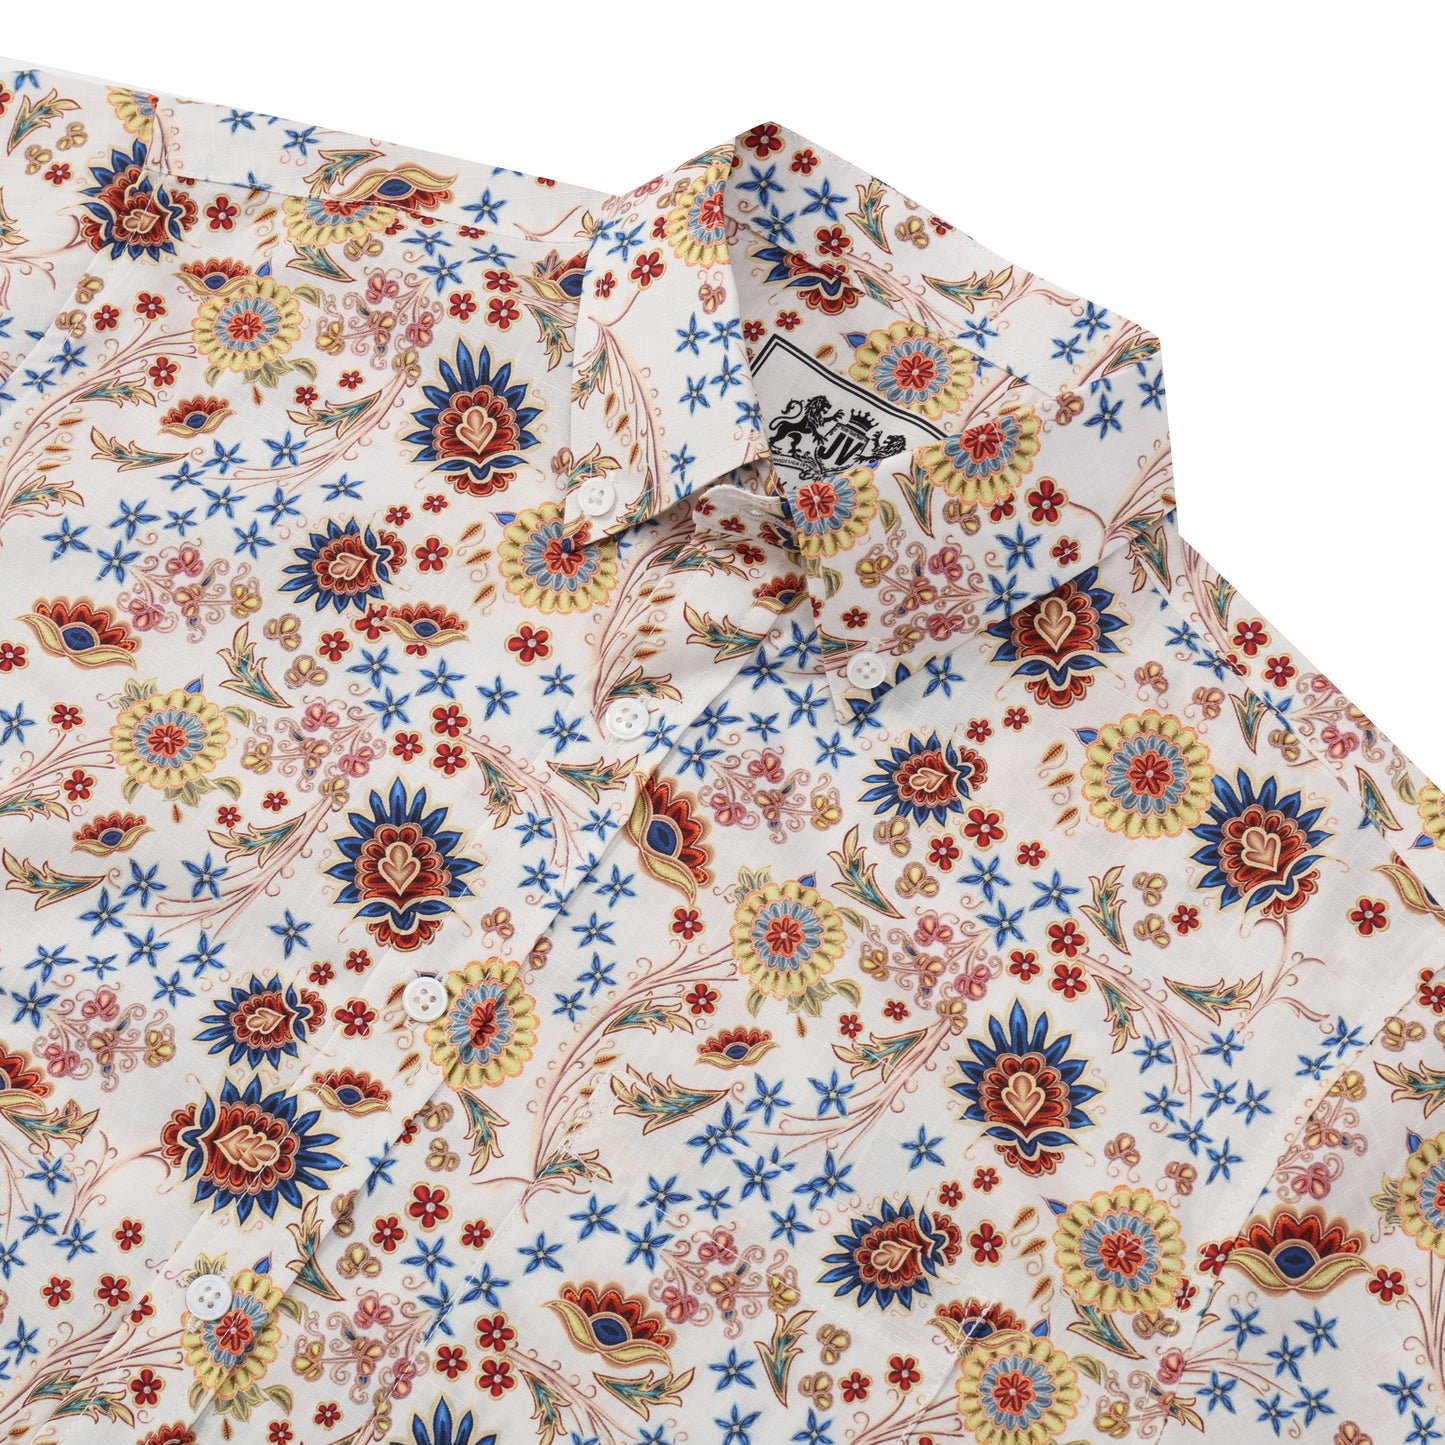 Japanese Style Floral Pattern Button Short Sleeve Shirt